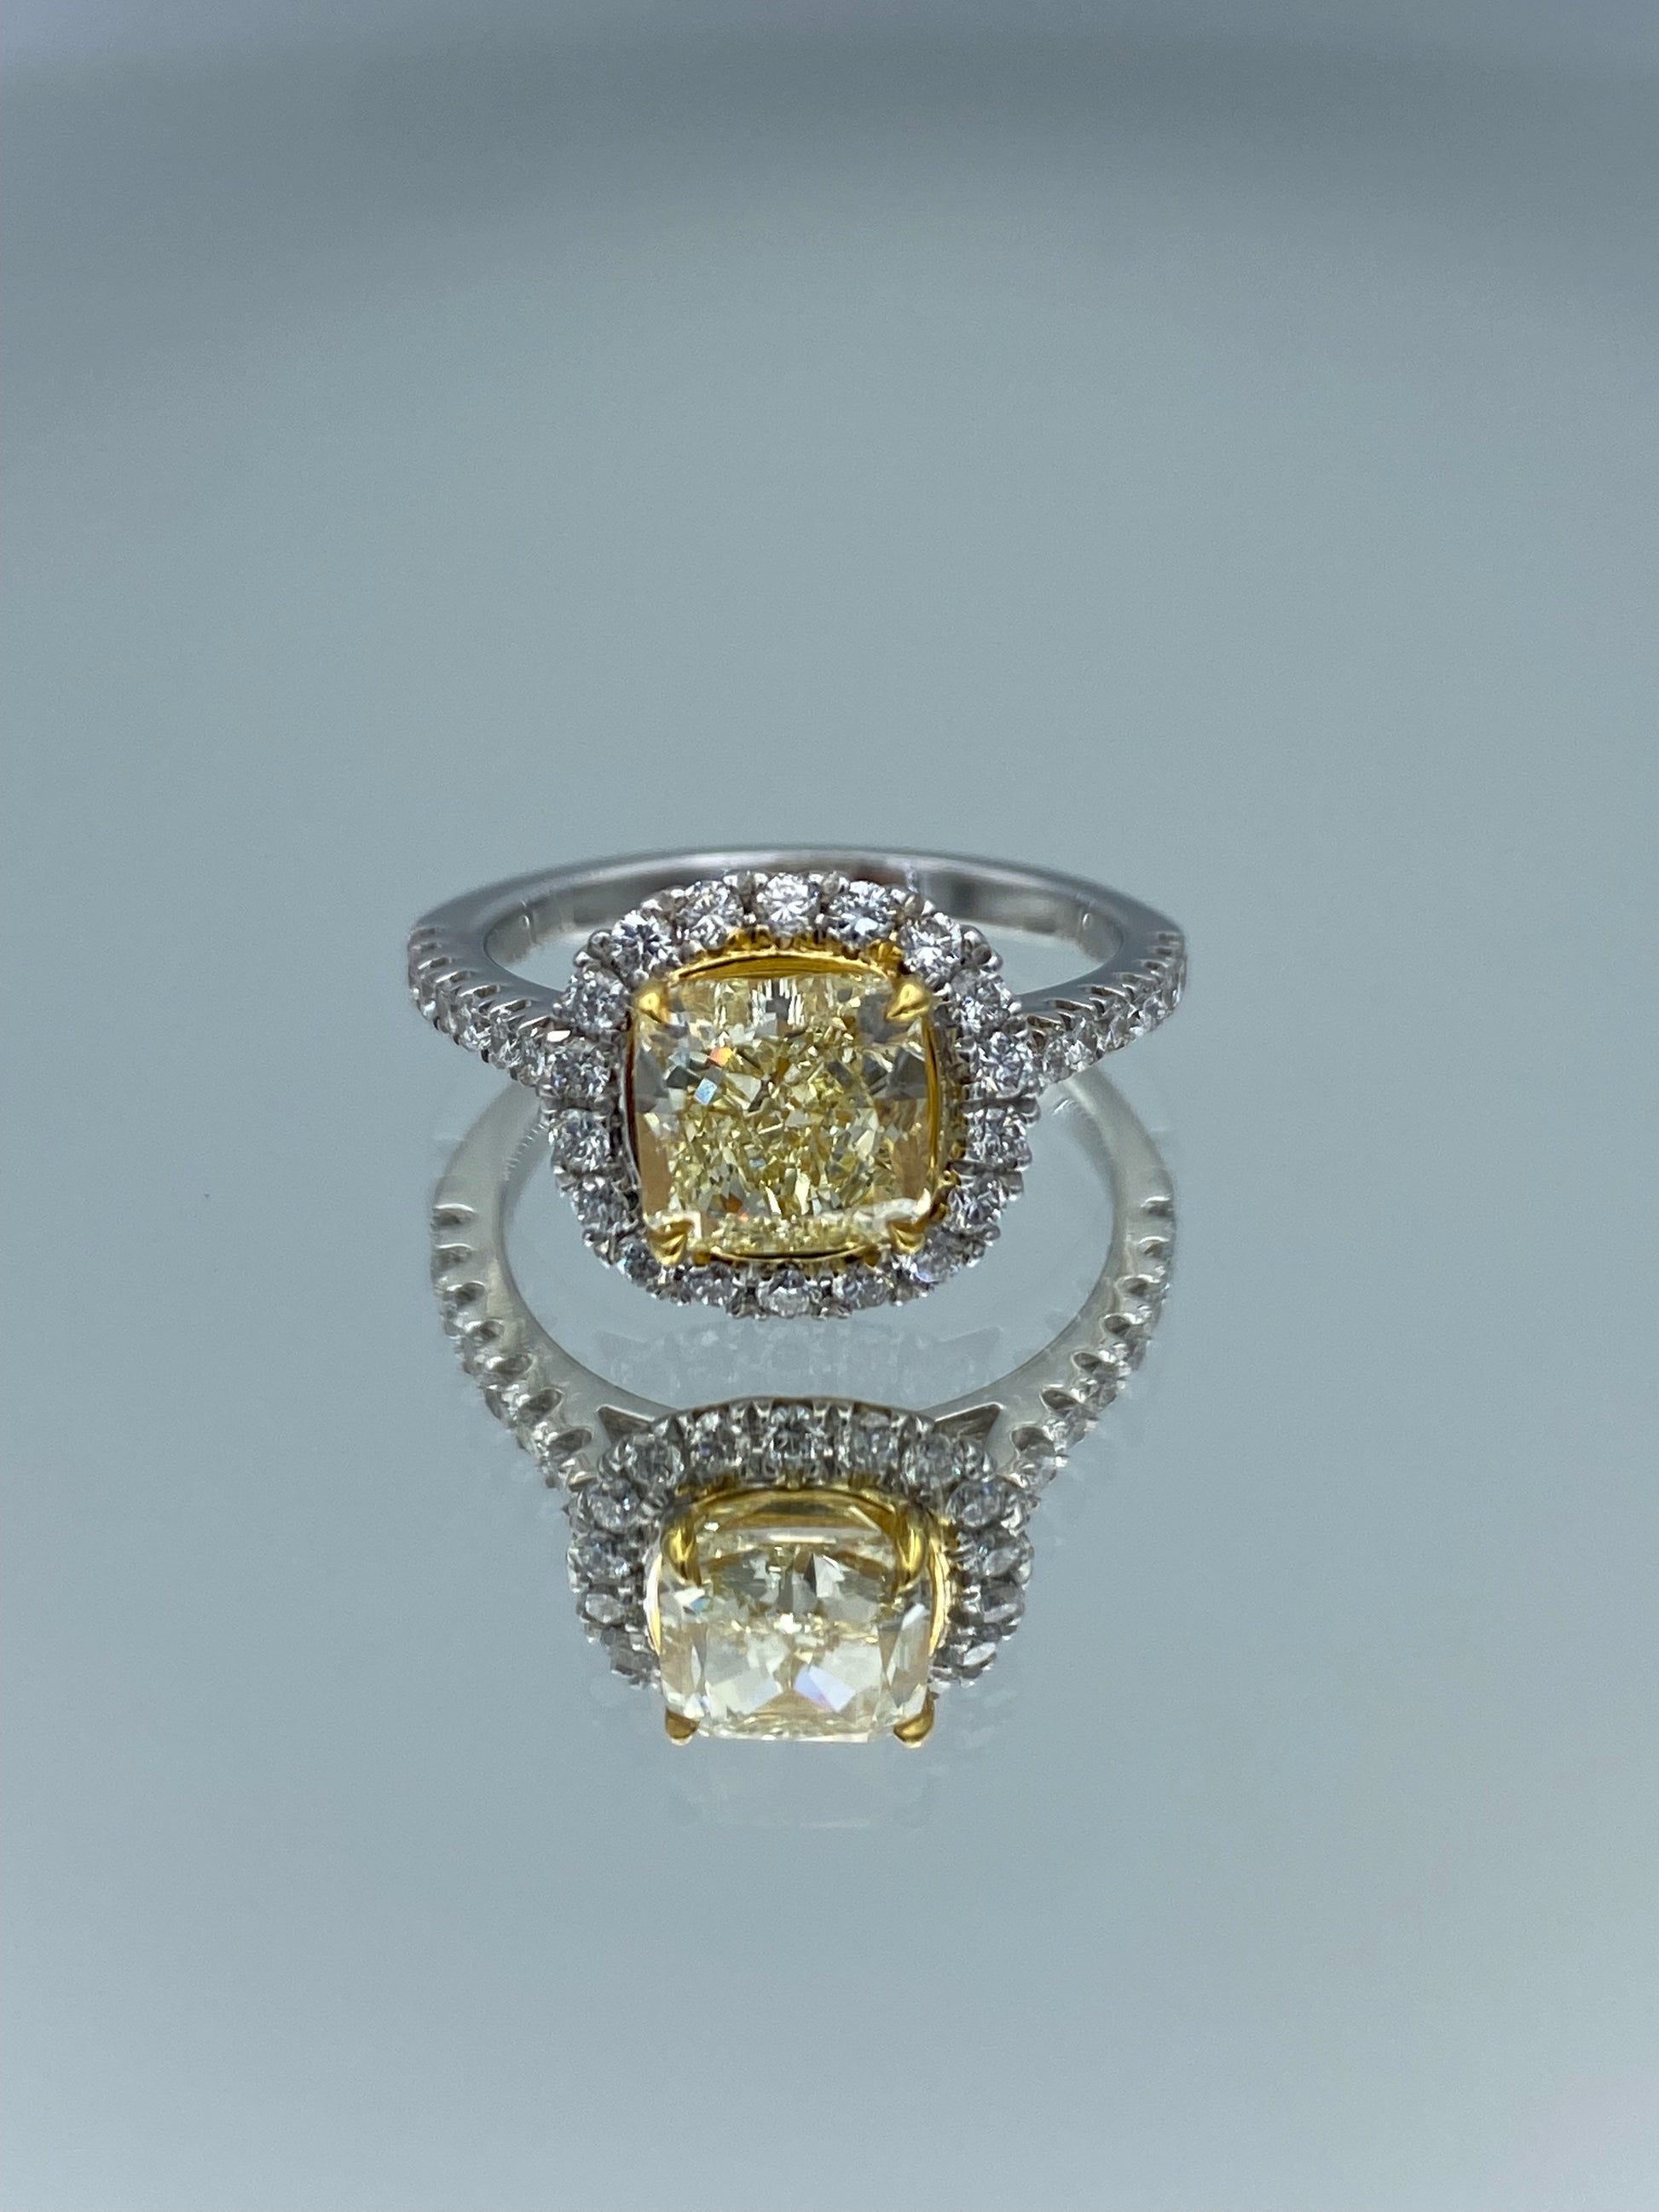 Cushion-Cut Halo Canary Yellow Diamond Engagement Ring in 14K White Gold - L and L Jewelry